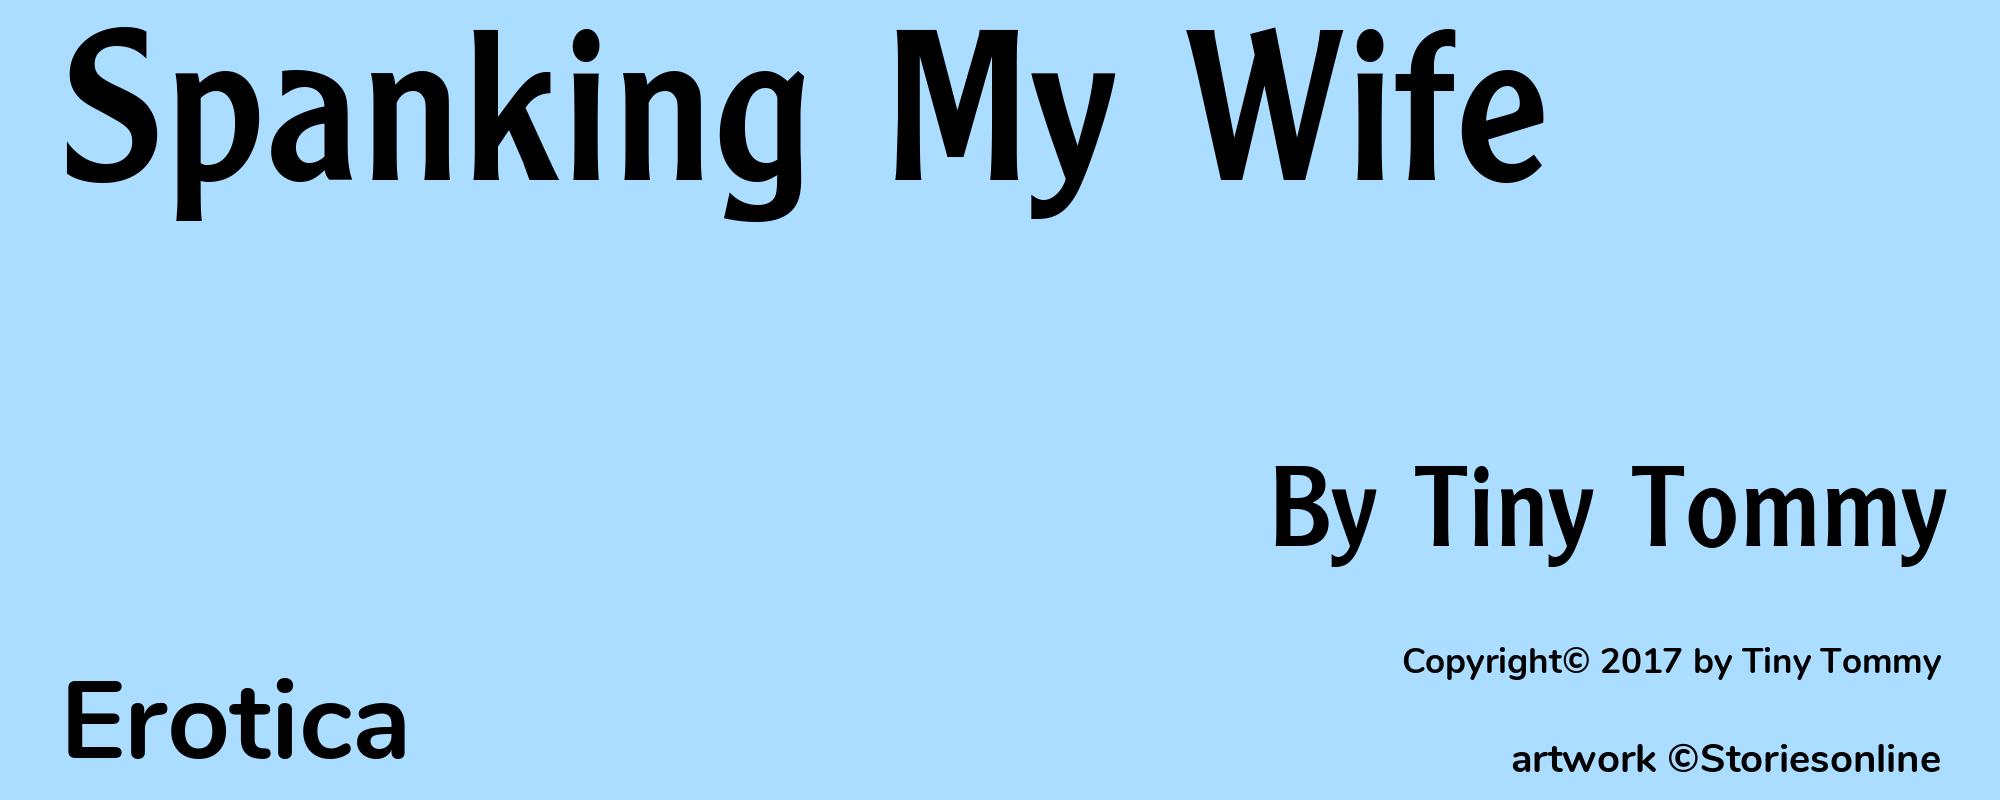 Spanking My Wife - Cover